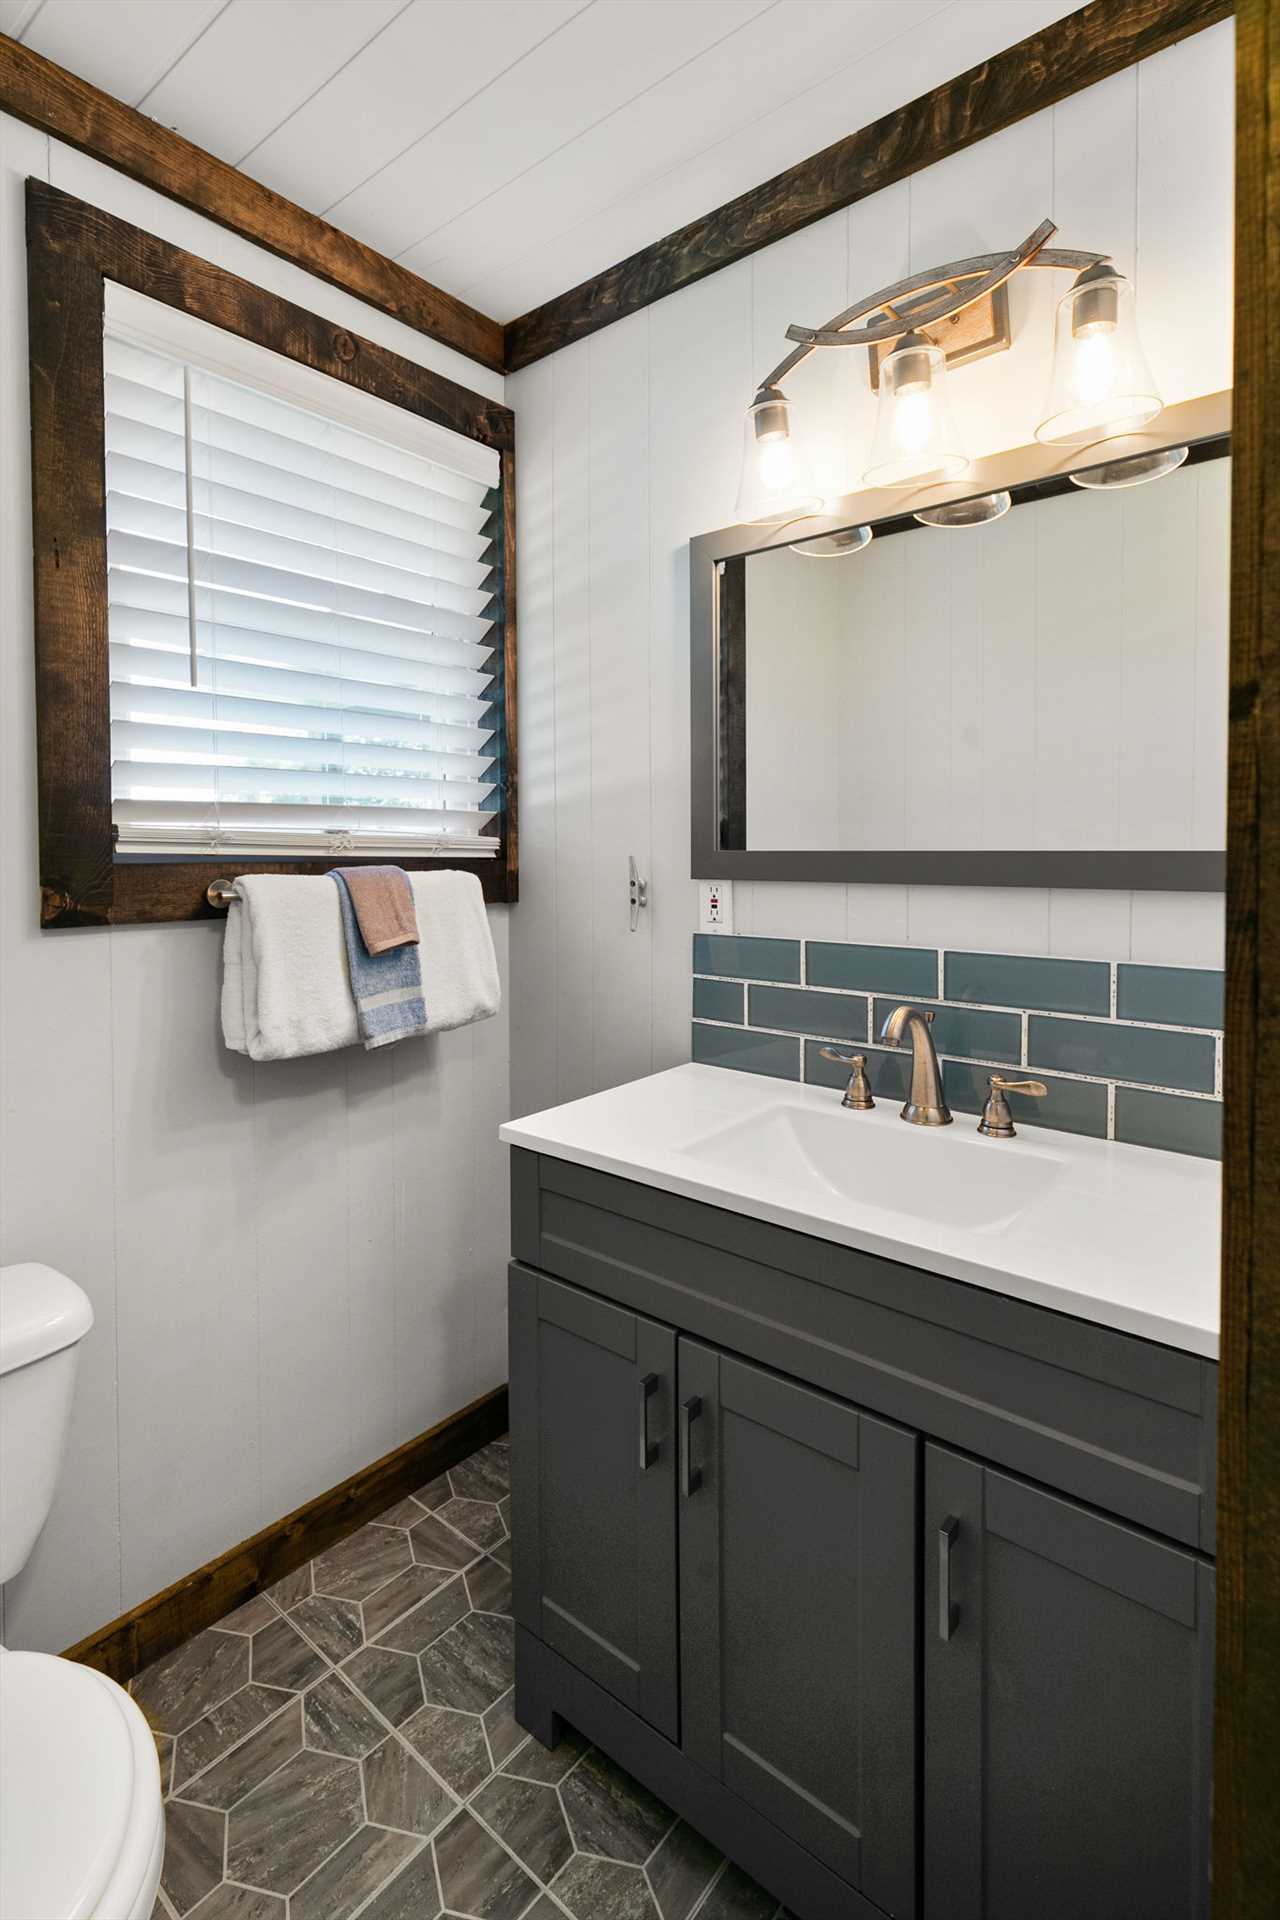 This bathroom has plenty of storage space with the attached 